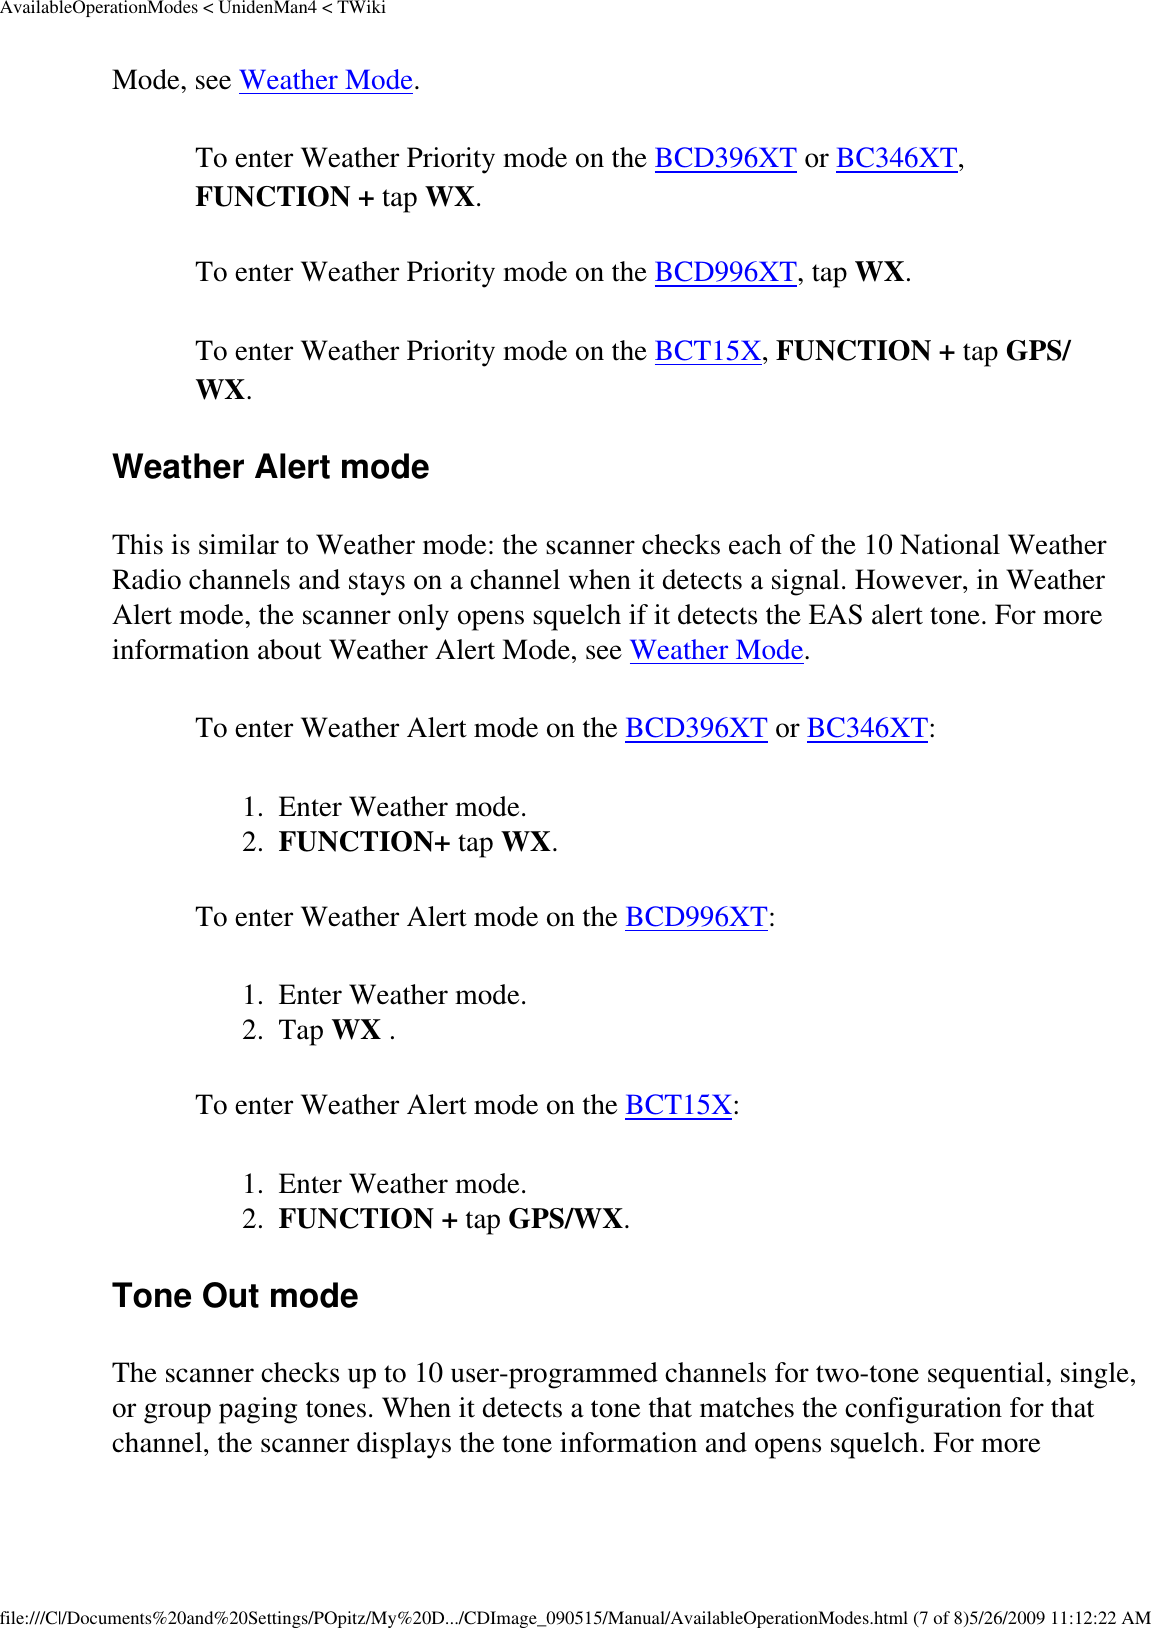 AvailableOperationModes &lt; UnidenMan4 &lt; TWikiMode, see Weather Mode. To enter Weather Priority mode on the BCD396XT or BC346XT, FUNCTION + tap WX. To enter Weather Priority mode on the BCD996XT, tap WX. To enter Weather Priority mode on the BCT15X, FUNCTION + tap GPS/WX. Weather Alert mode This is similar to Weather mode: the scanner checks each of the 10 National Weather Radio channels and stays on a channel when it detects a signal. However, in Weather Alert mode, the scanner only opens squelch if it detects the EAS alert tone. For more information about Weather Alert Mode, see Weather Mode. To enter Weather Alert mode on the BCD396XT or BC346XT: 1.  Enter Weather mode. 2.  FUNCTION+ tap WX. To enter Weather Alert mode on the BCD996XT: 1.  Enter Weather mode. 2.  Tap WX . To enter Weather Alert mode on the BCT15X: 1.  Enter Weather mode. 2.  FUNCTION + tap GPS/WX. Tone Out mode The scanner checks up to 10 user-programmed channels for two-tone sequential, single, or group paging tones. When it detects a tone that matches the configuration for that channel, the scanner displays the tone information and opens squelch. For more file:///C|/Documents%20and%20Settings/POpitz/My%20D.../CDImage_090515/Manual/AvailableOperationModes.html (7 of 8)5/26/2009 11:12:22 AM